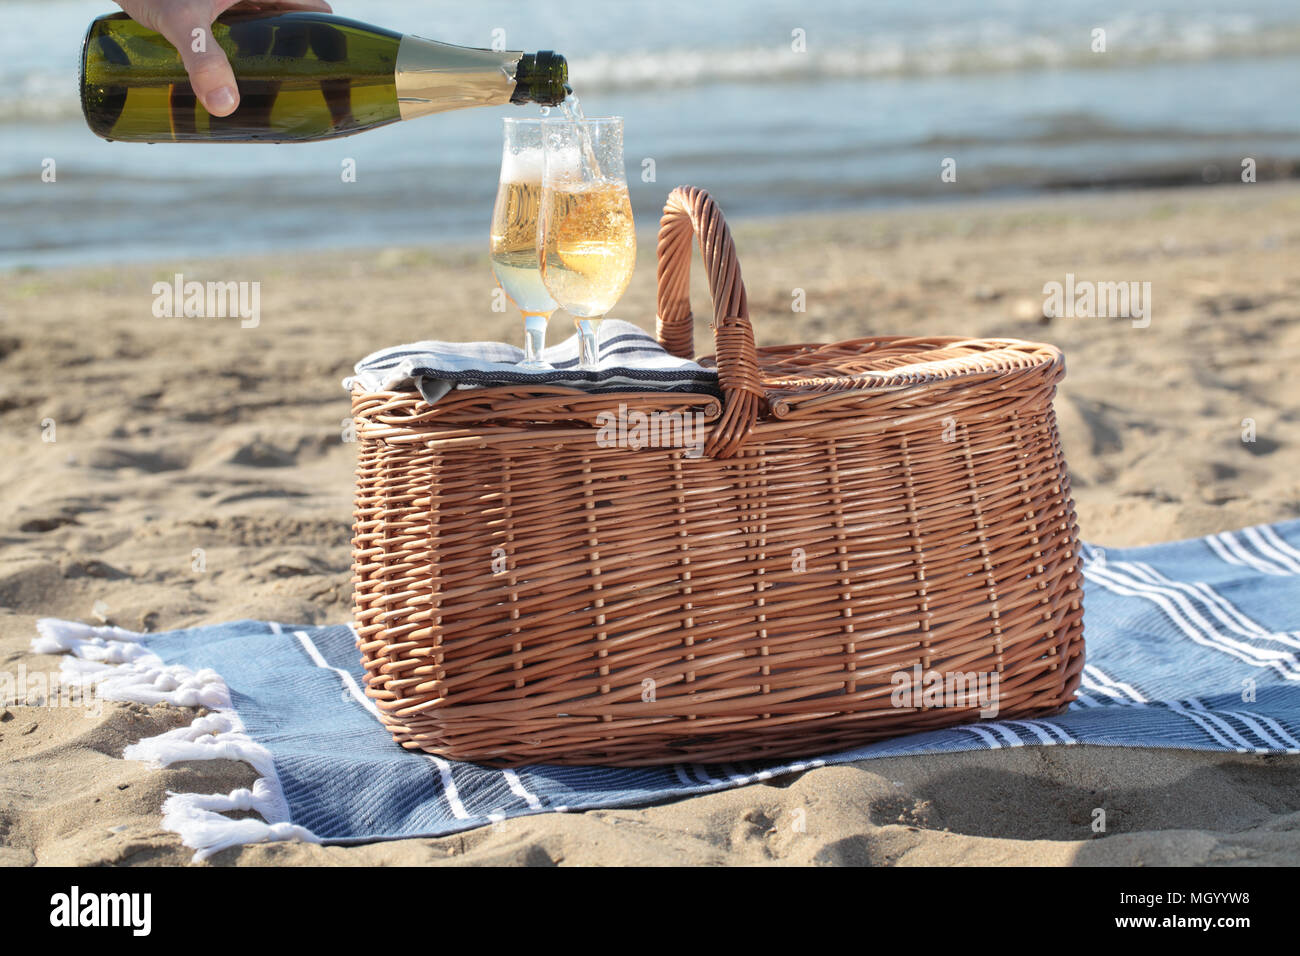 Glasses with champagne on a picnic basket Stock Photo